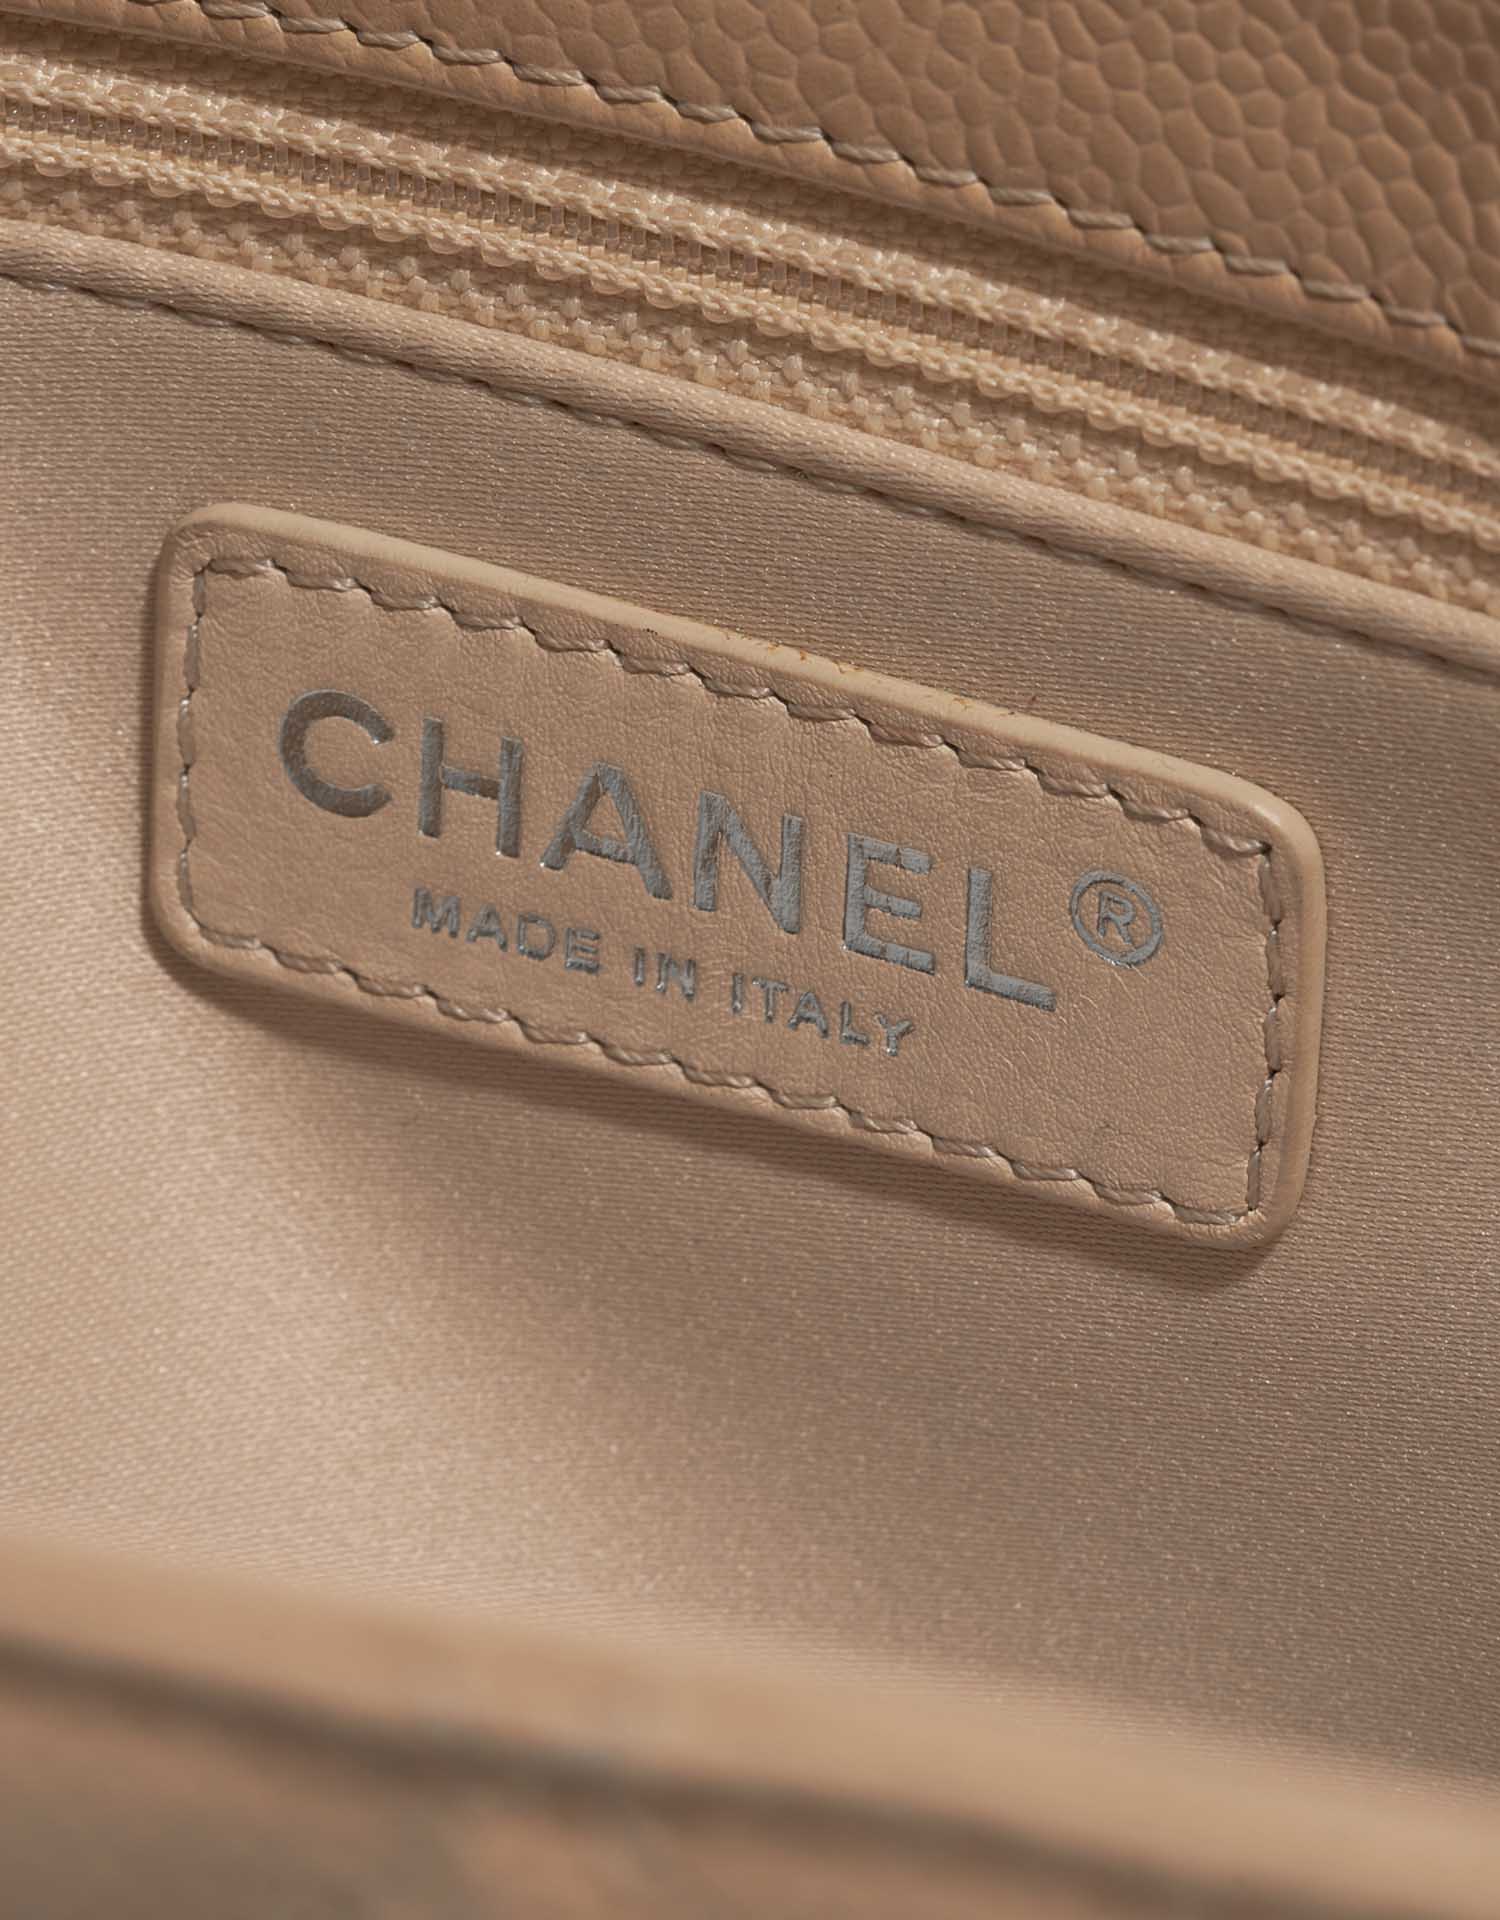 Pre-owned Chanel bag Shopping Tote GST Caviar Beige Beige Logo | Sell your designer bag on Saclab.com